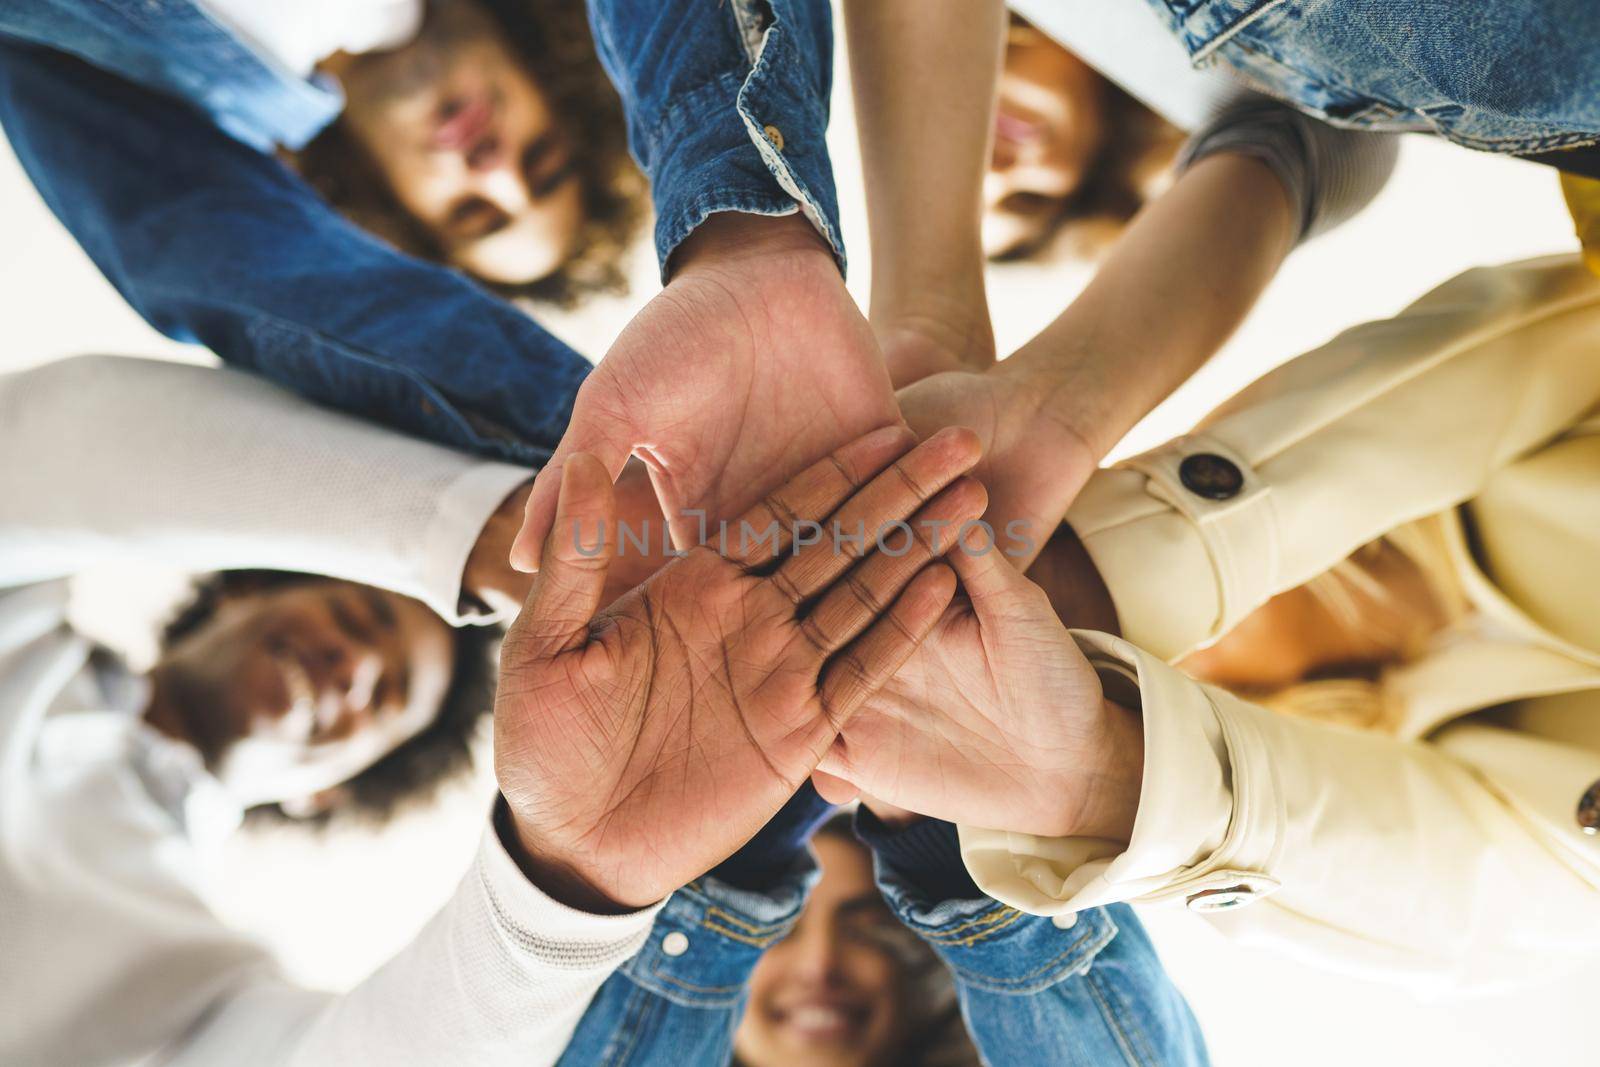 Hands of a multi-ethnic group of friends joined together as a sign of support and teamwork. Young people having fun together.